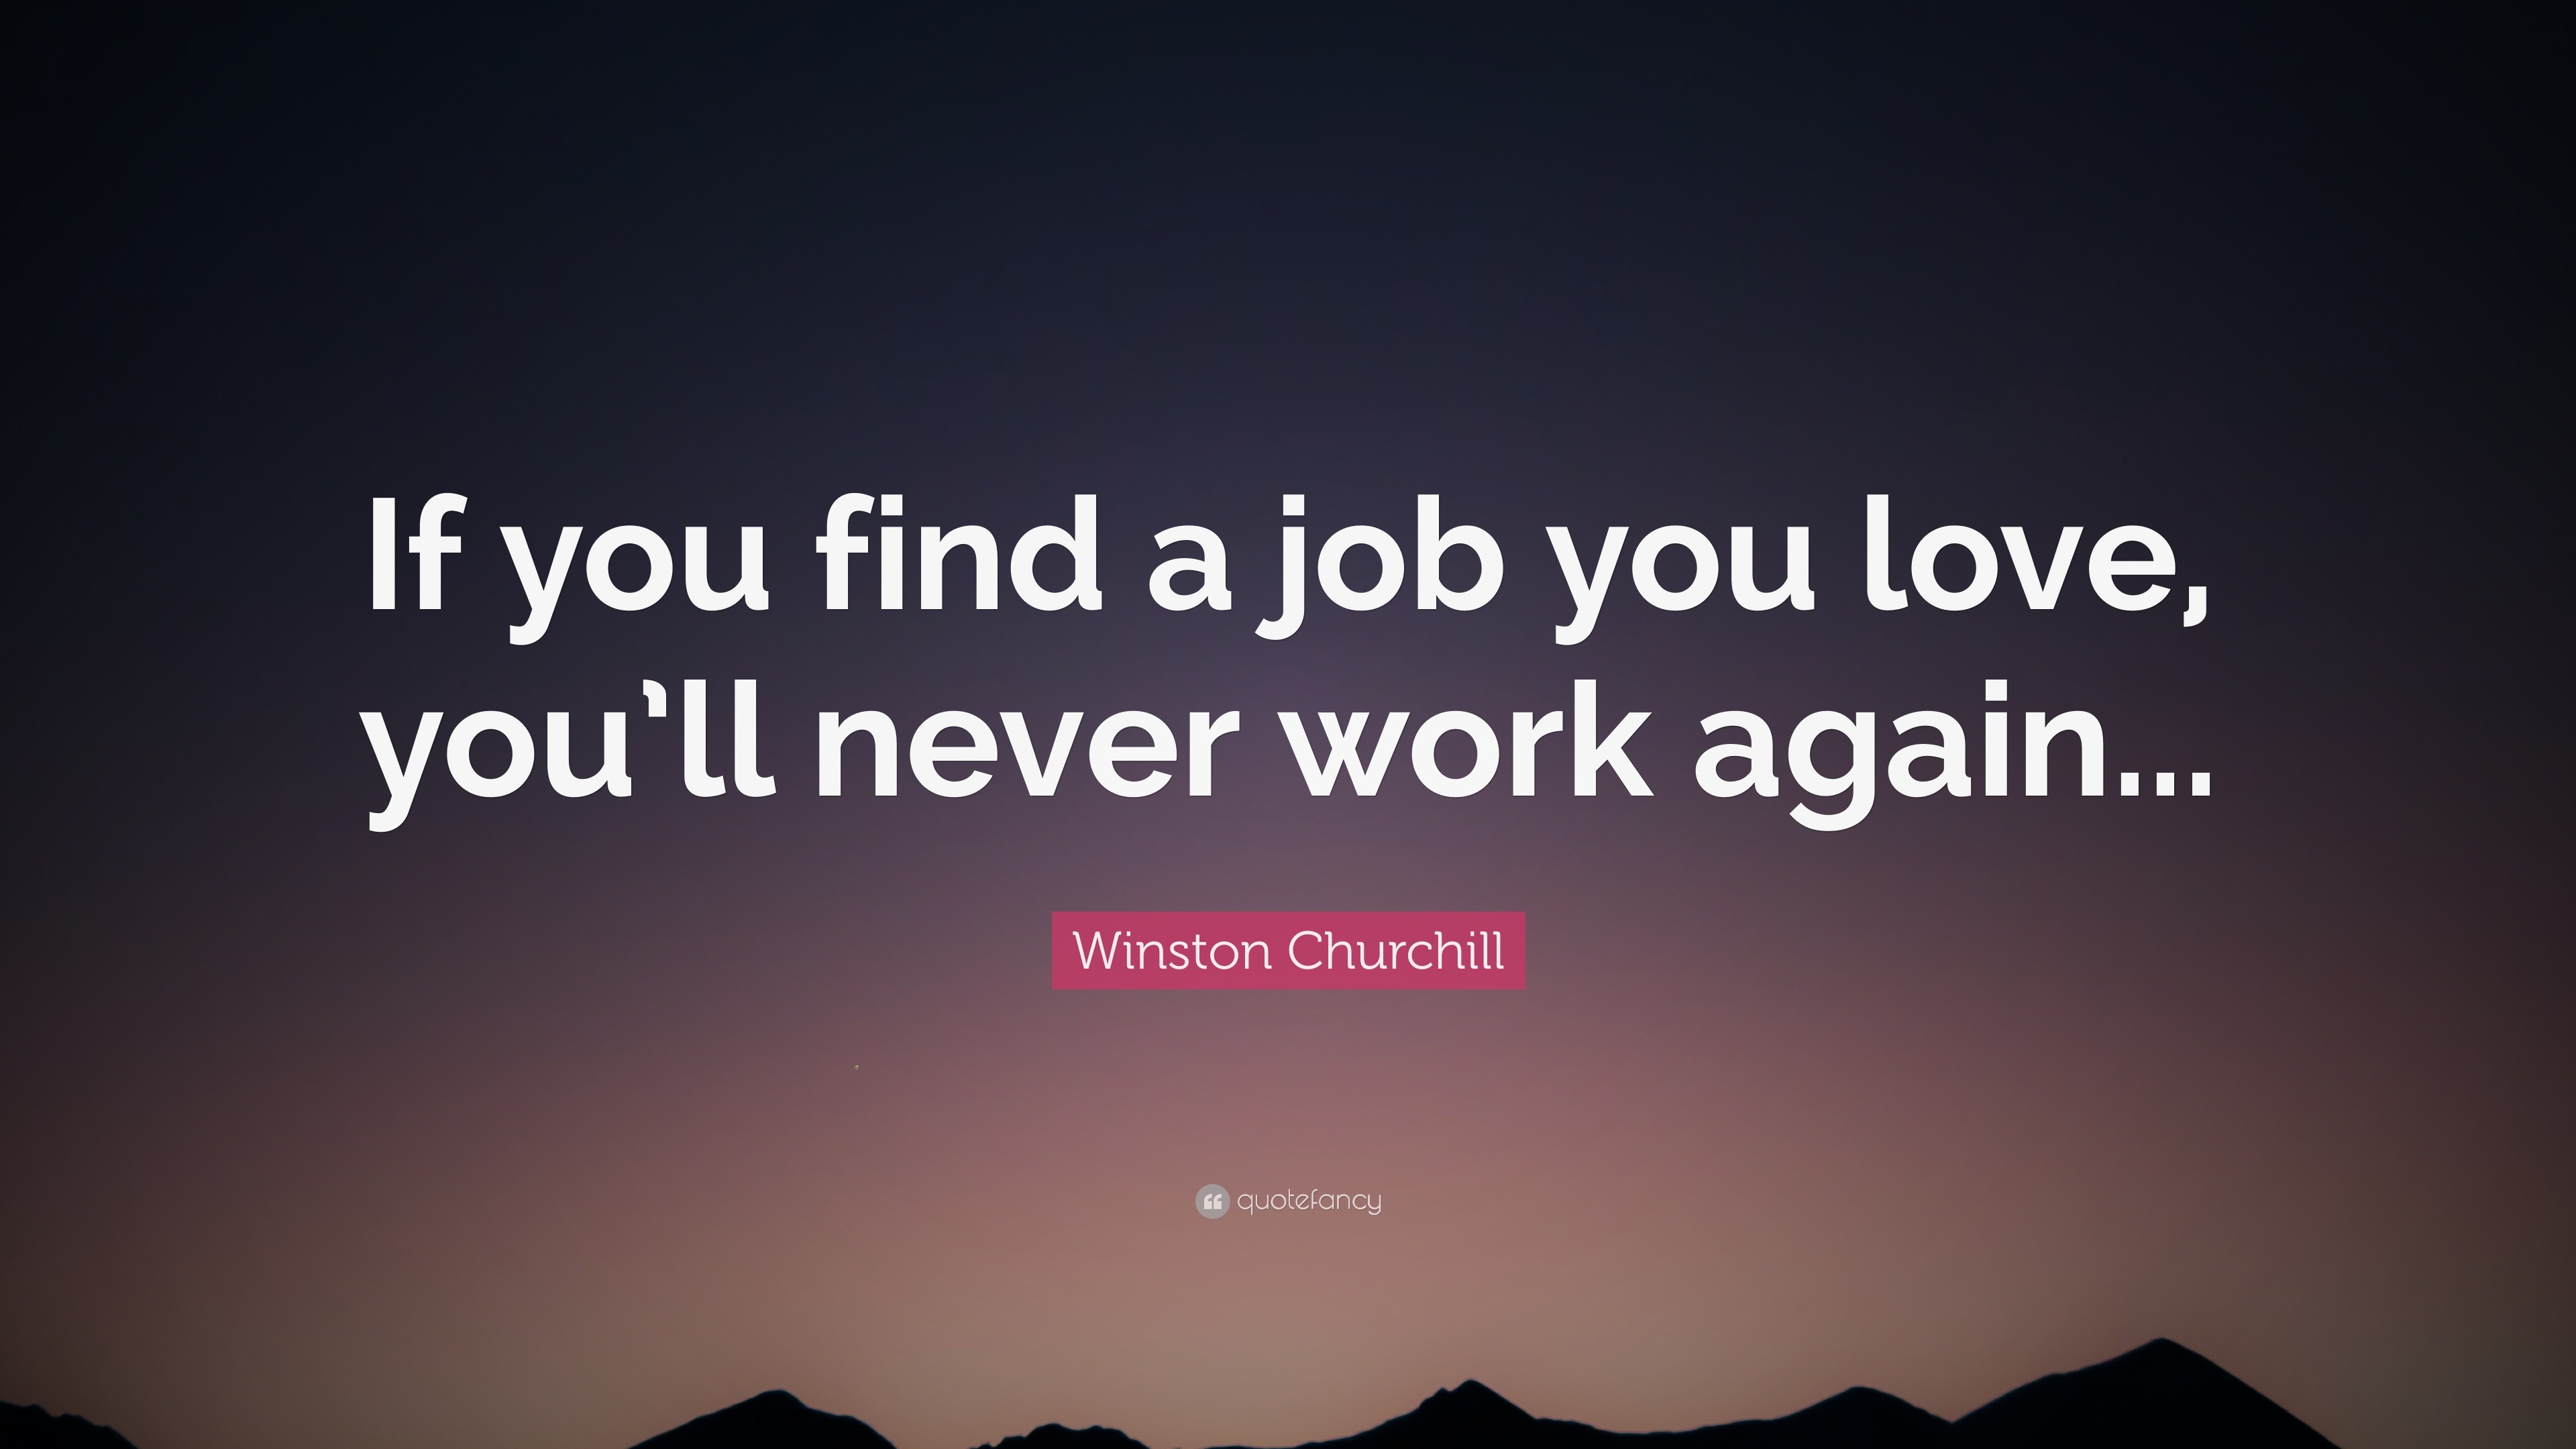 Winston Churchill Quote “If you find a job you love you ll